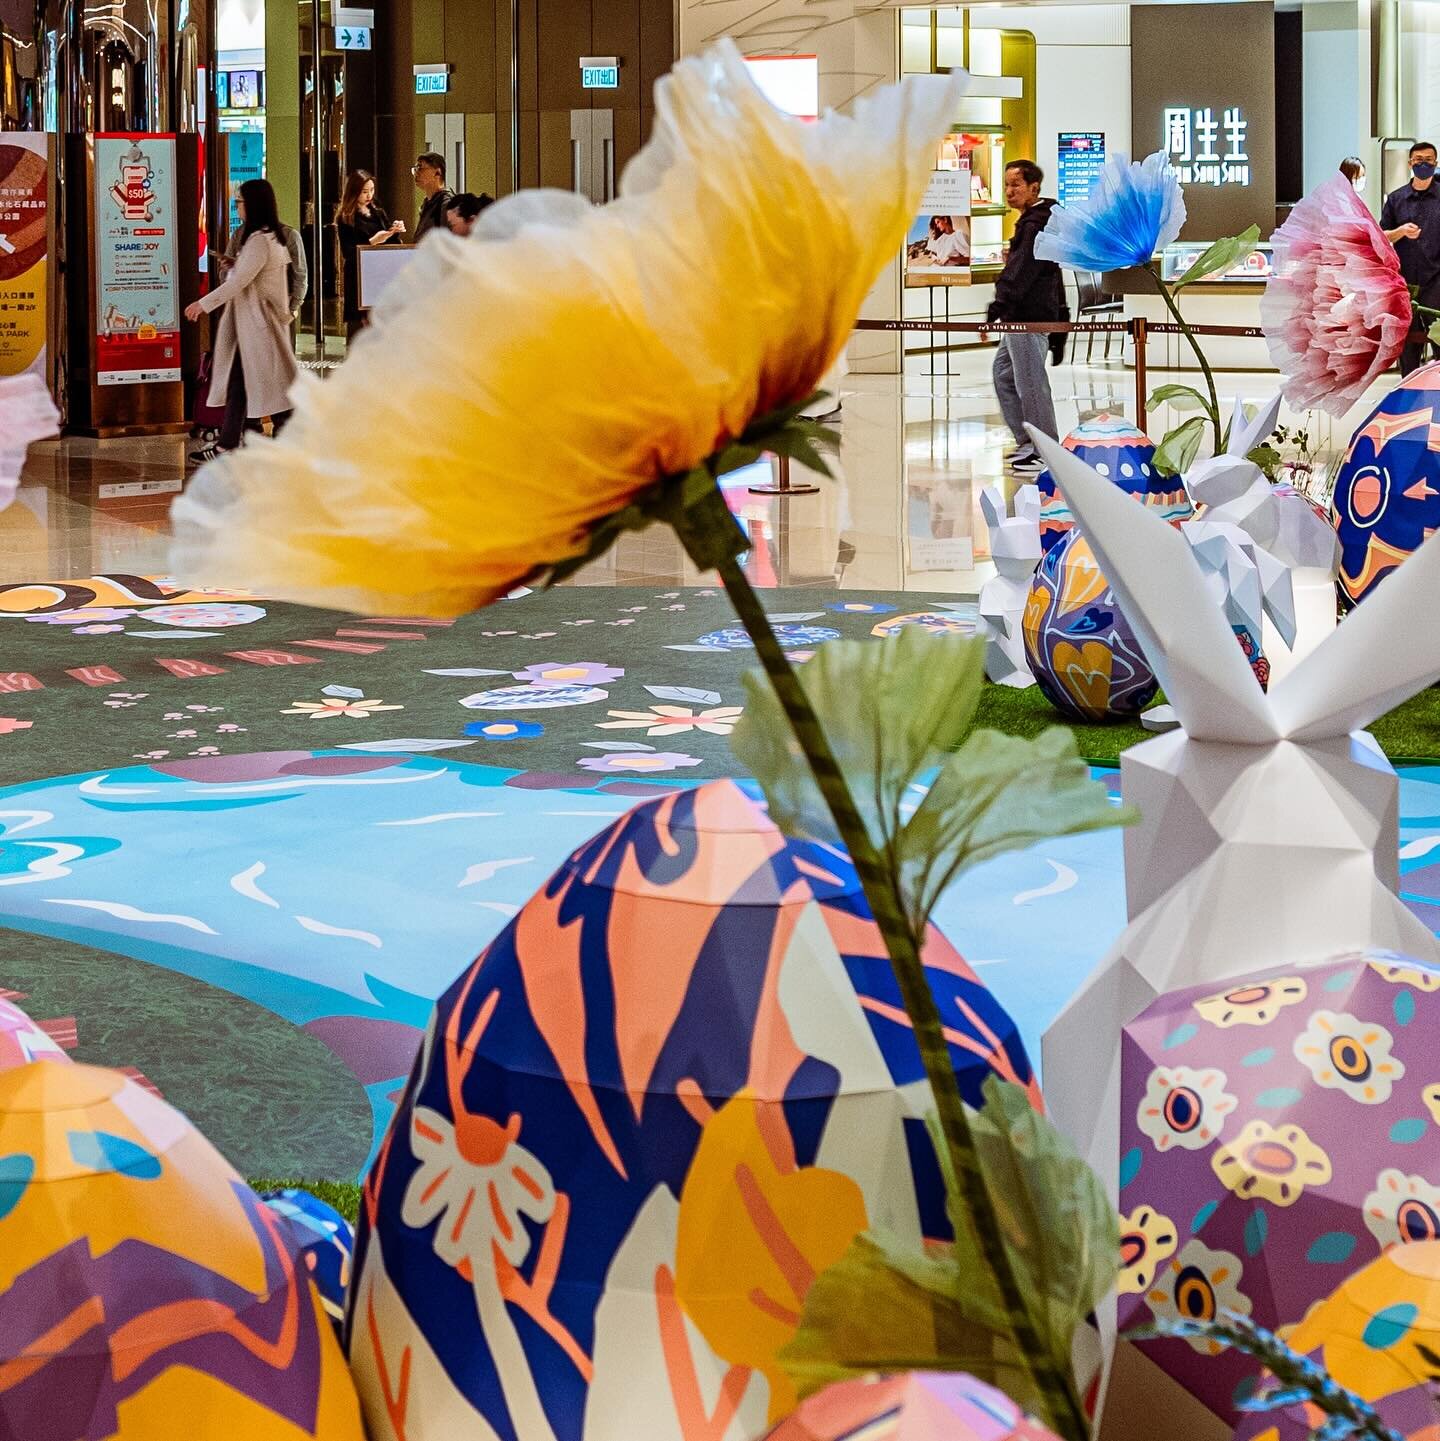 Excited to share our latest work: the Easter decorations @ninamallhk . Our goal is to make at least 60% of the items used for this campaign recyclable. We managed to create the Easter eggs, bunnies, and parts of the tree out of paper cardboard locall